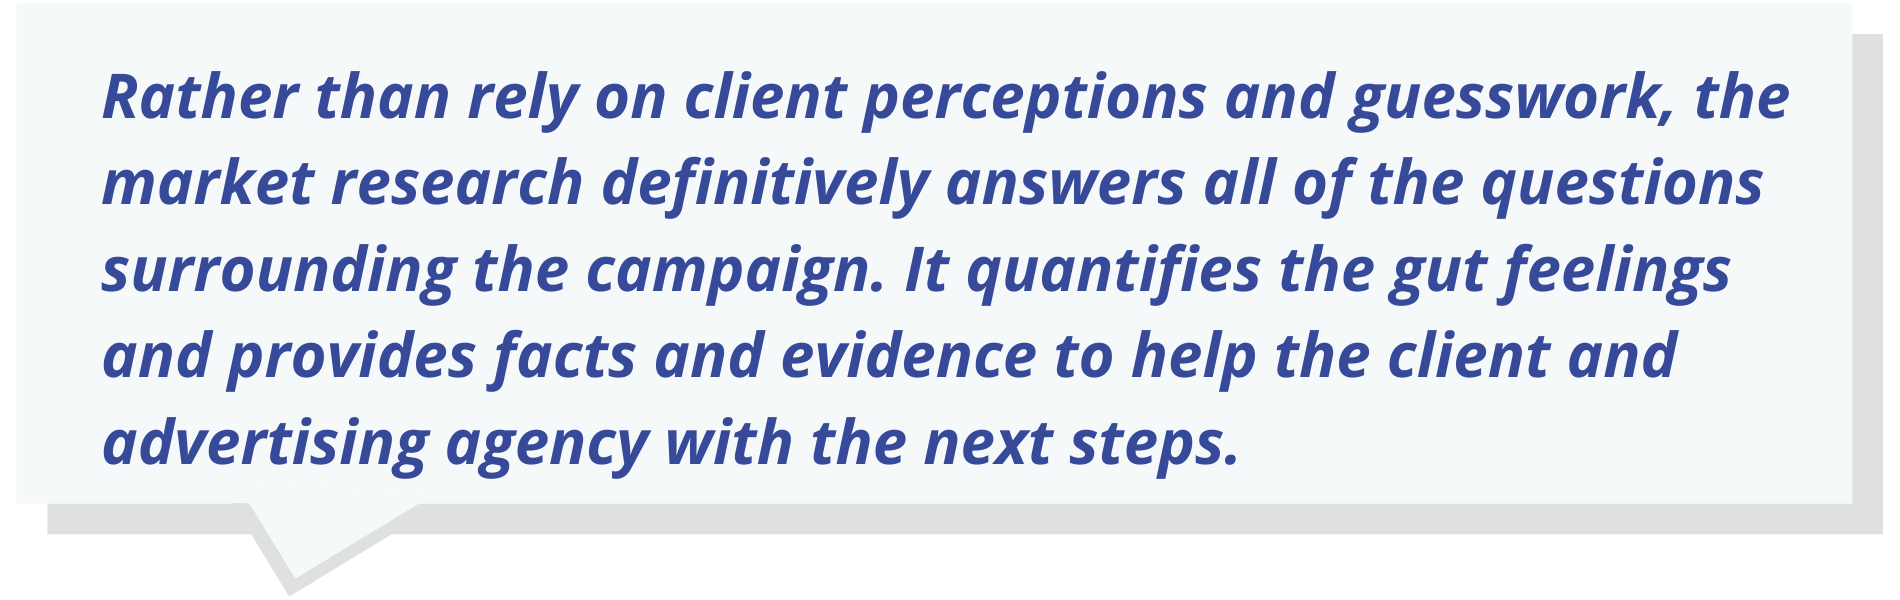 Rather than rely on client perceptions and guesswork, the market research definitively answers all of the questions surrounding the campaign. It quantifies the gut feelings and provides facts and evidence to help the client and advertising agency with the next steps.